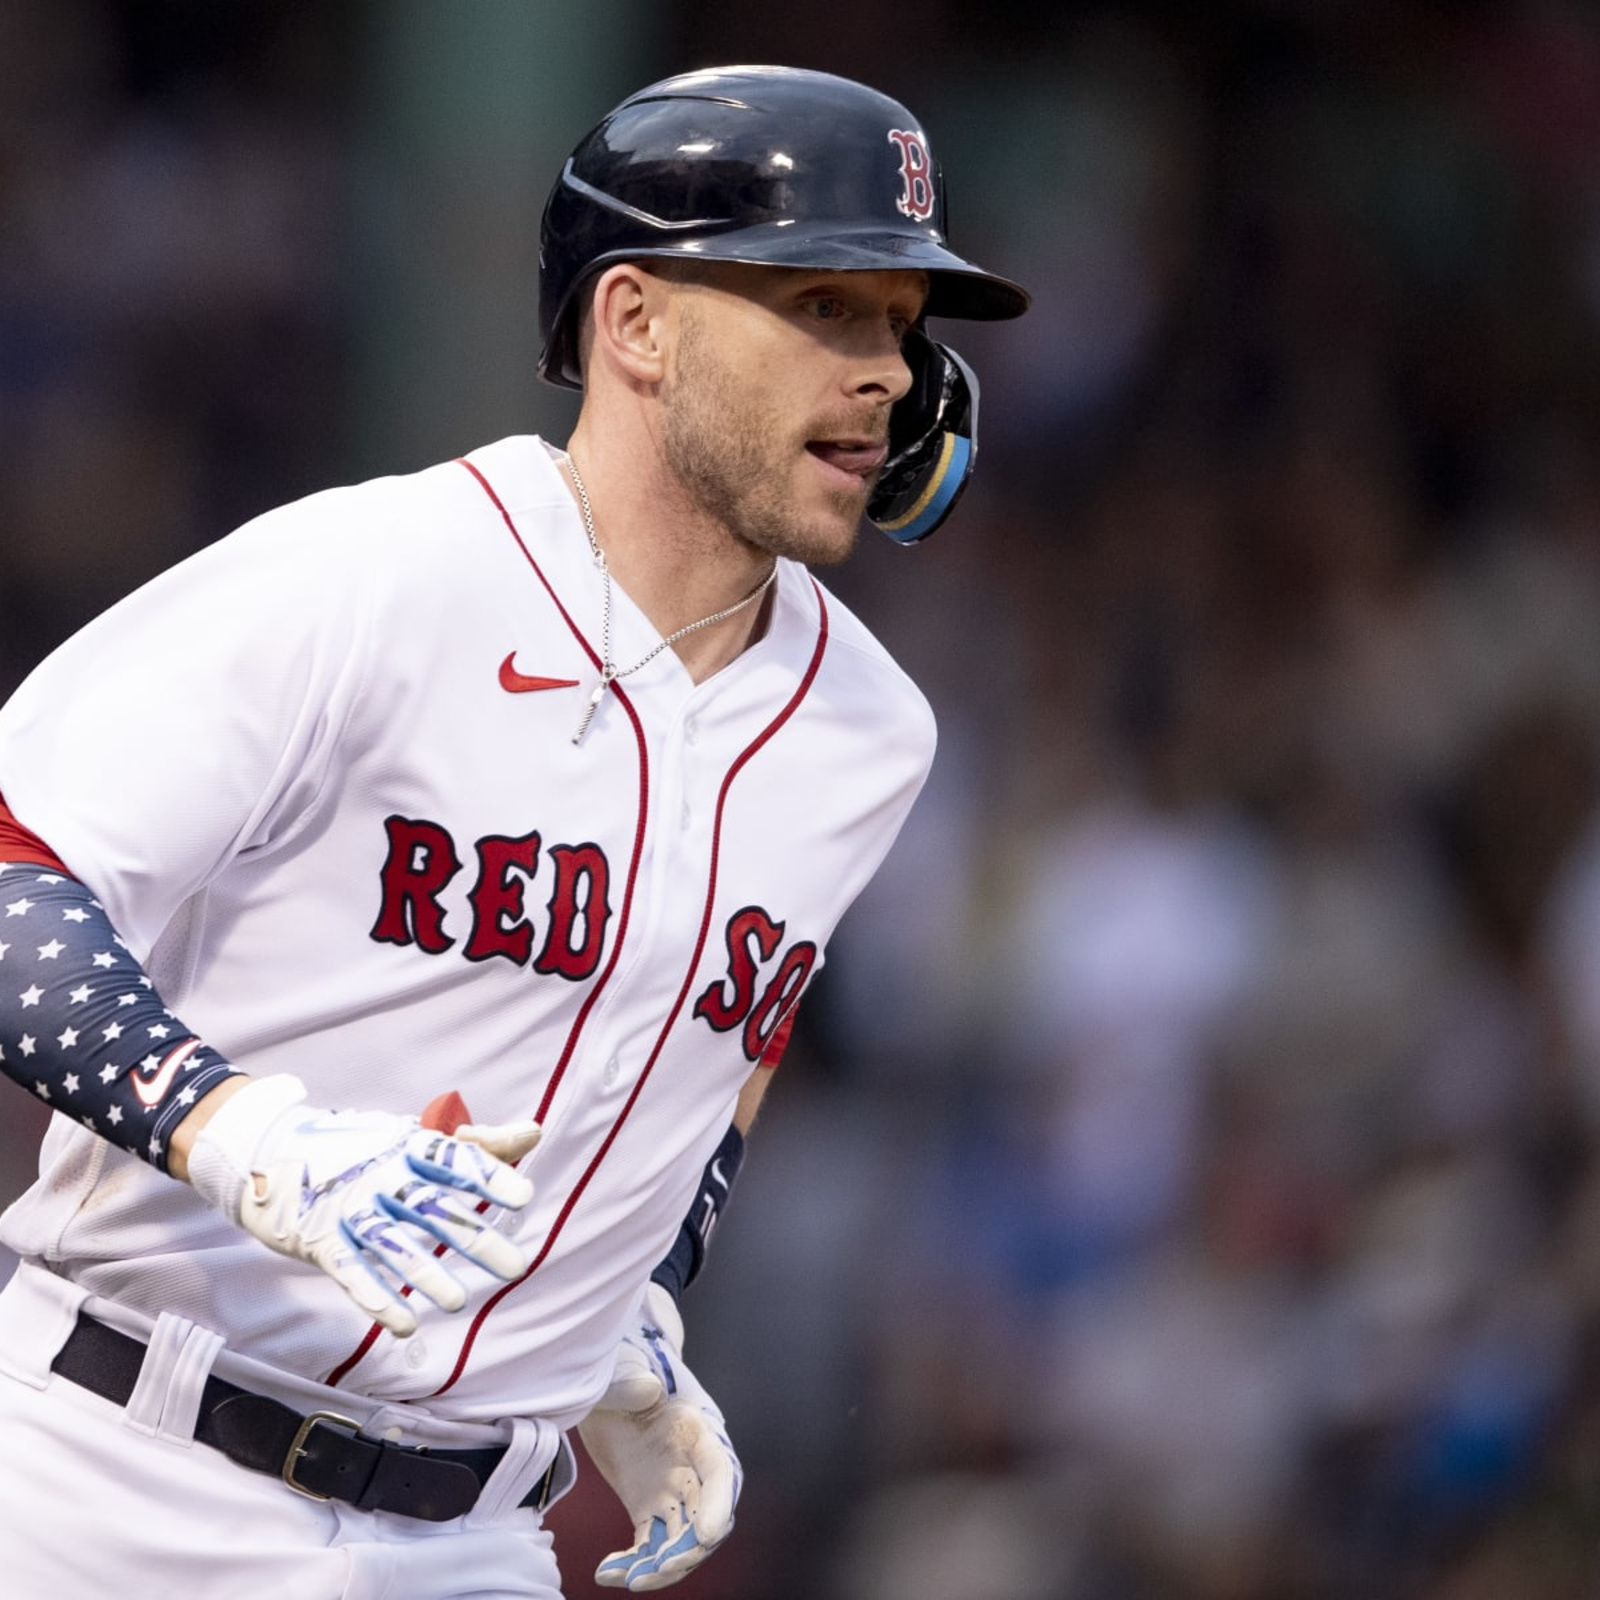 RUMOR: Trevor Story, Red Sox injury disconnect will make fans furious